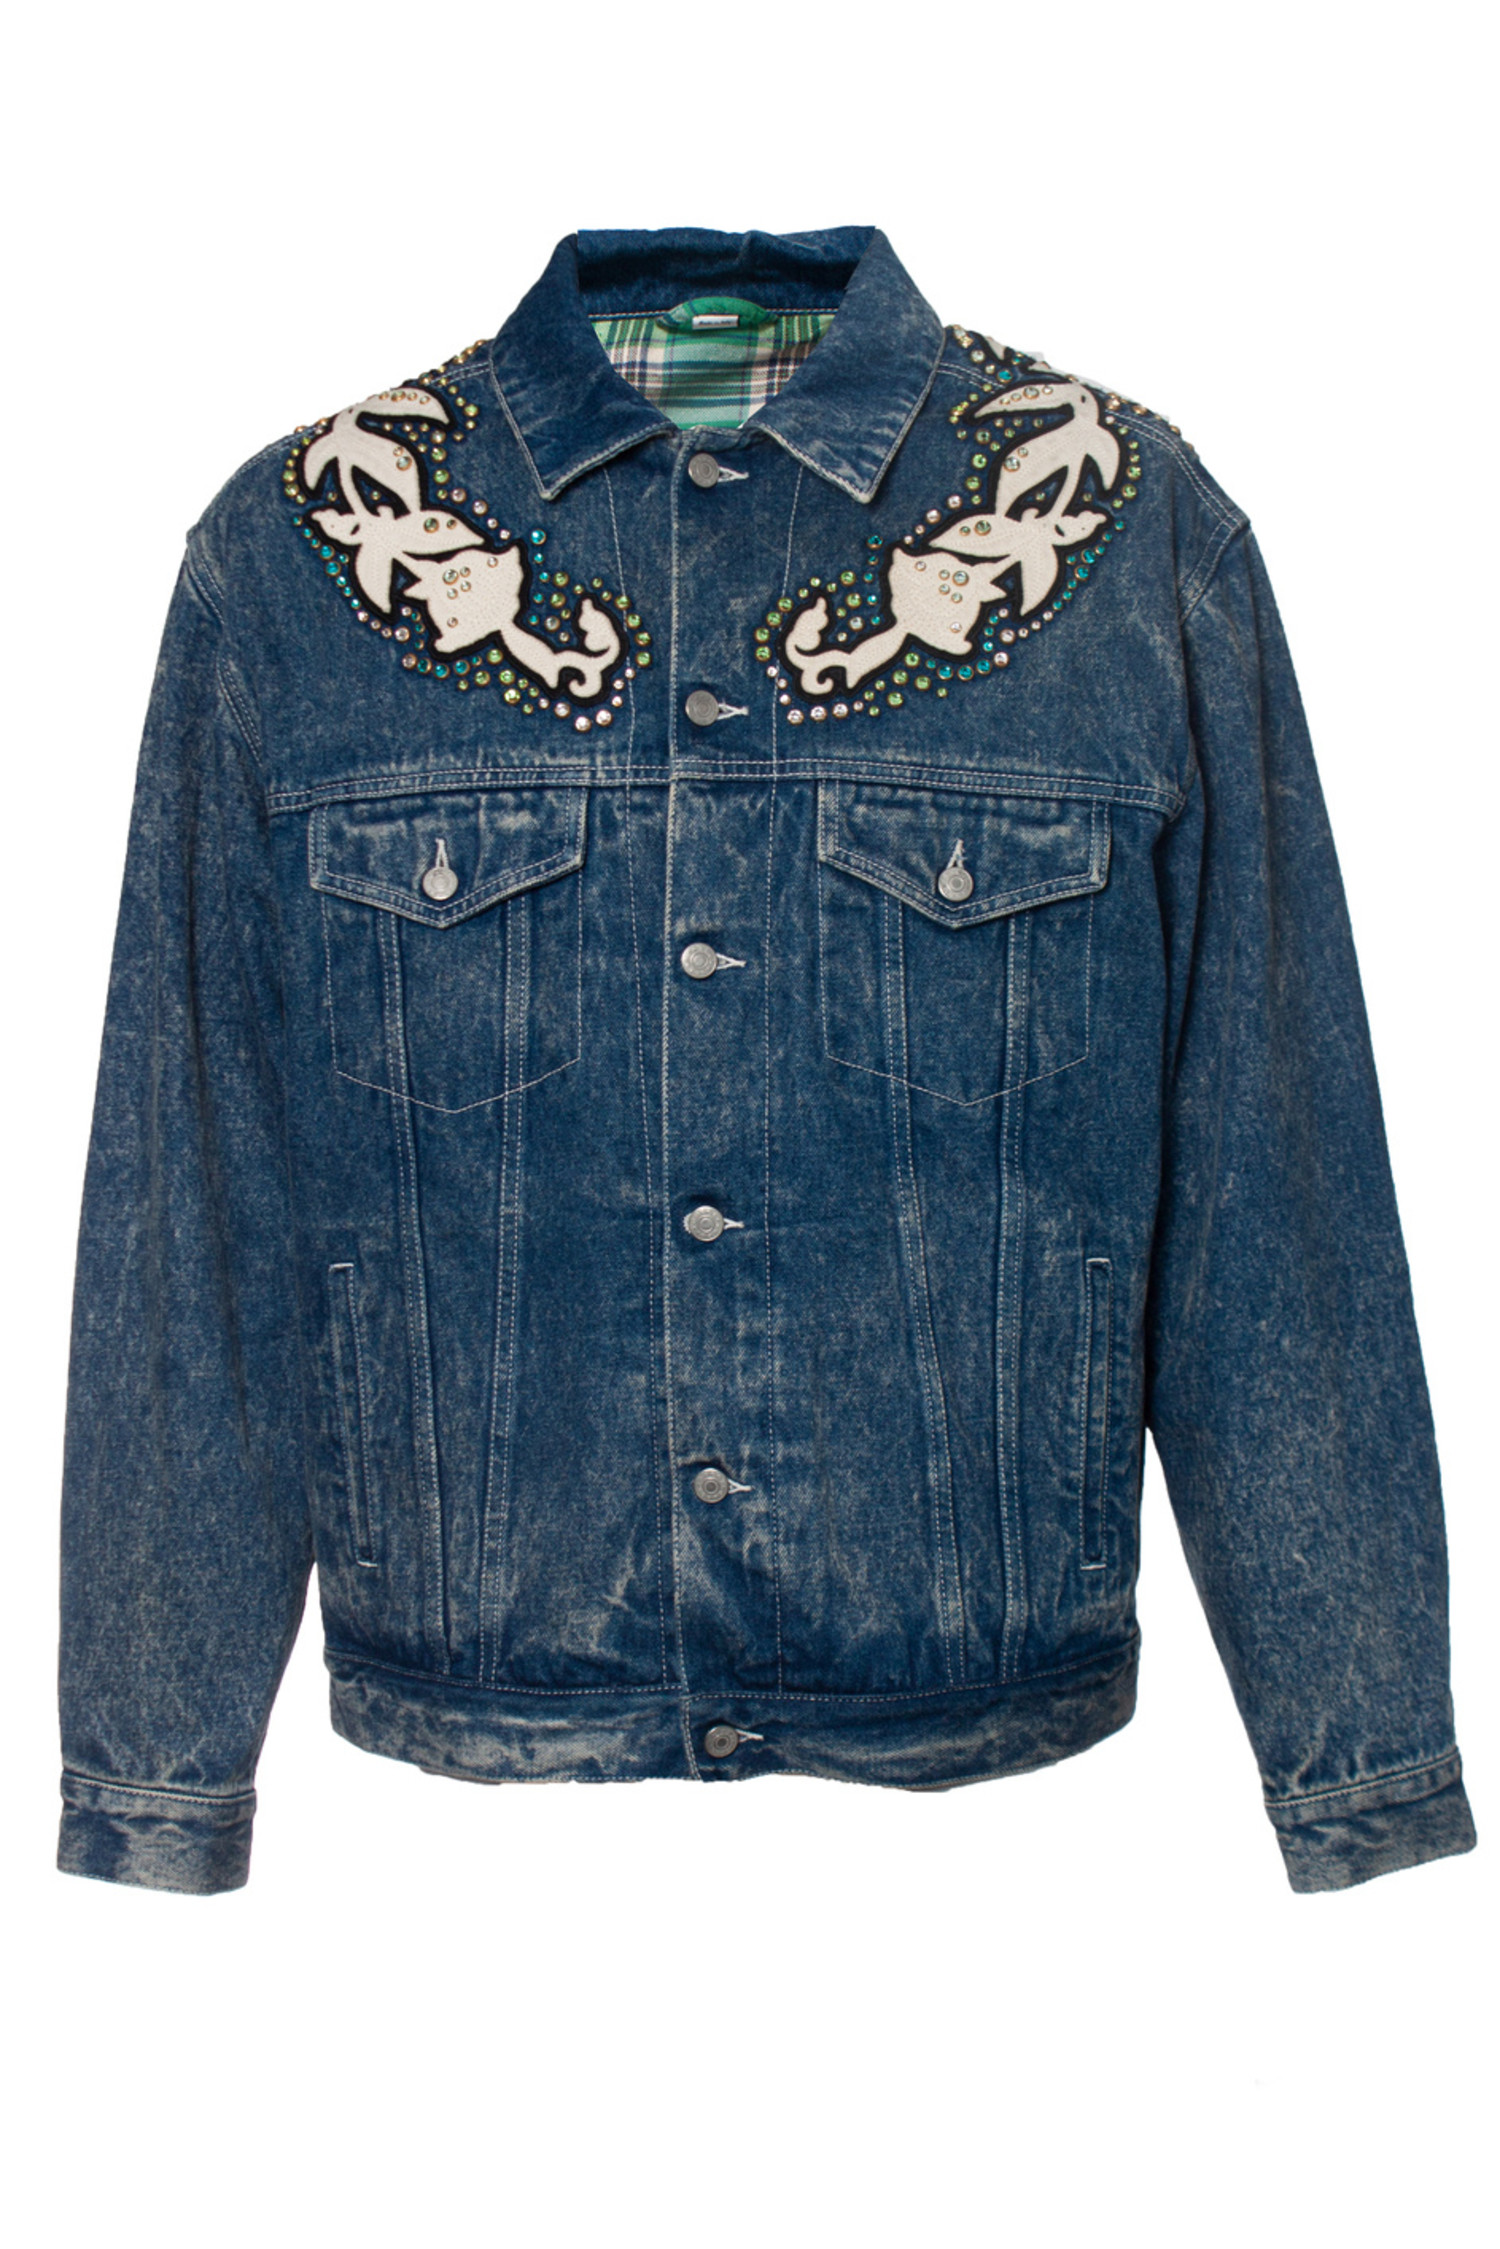 Upcycled Gucci denim Jacket – Sweet Meadow Boutique